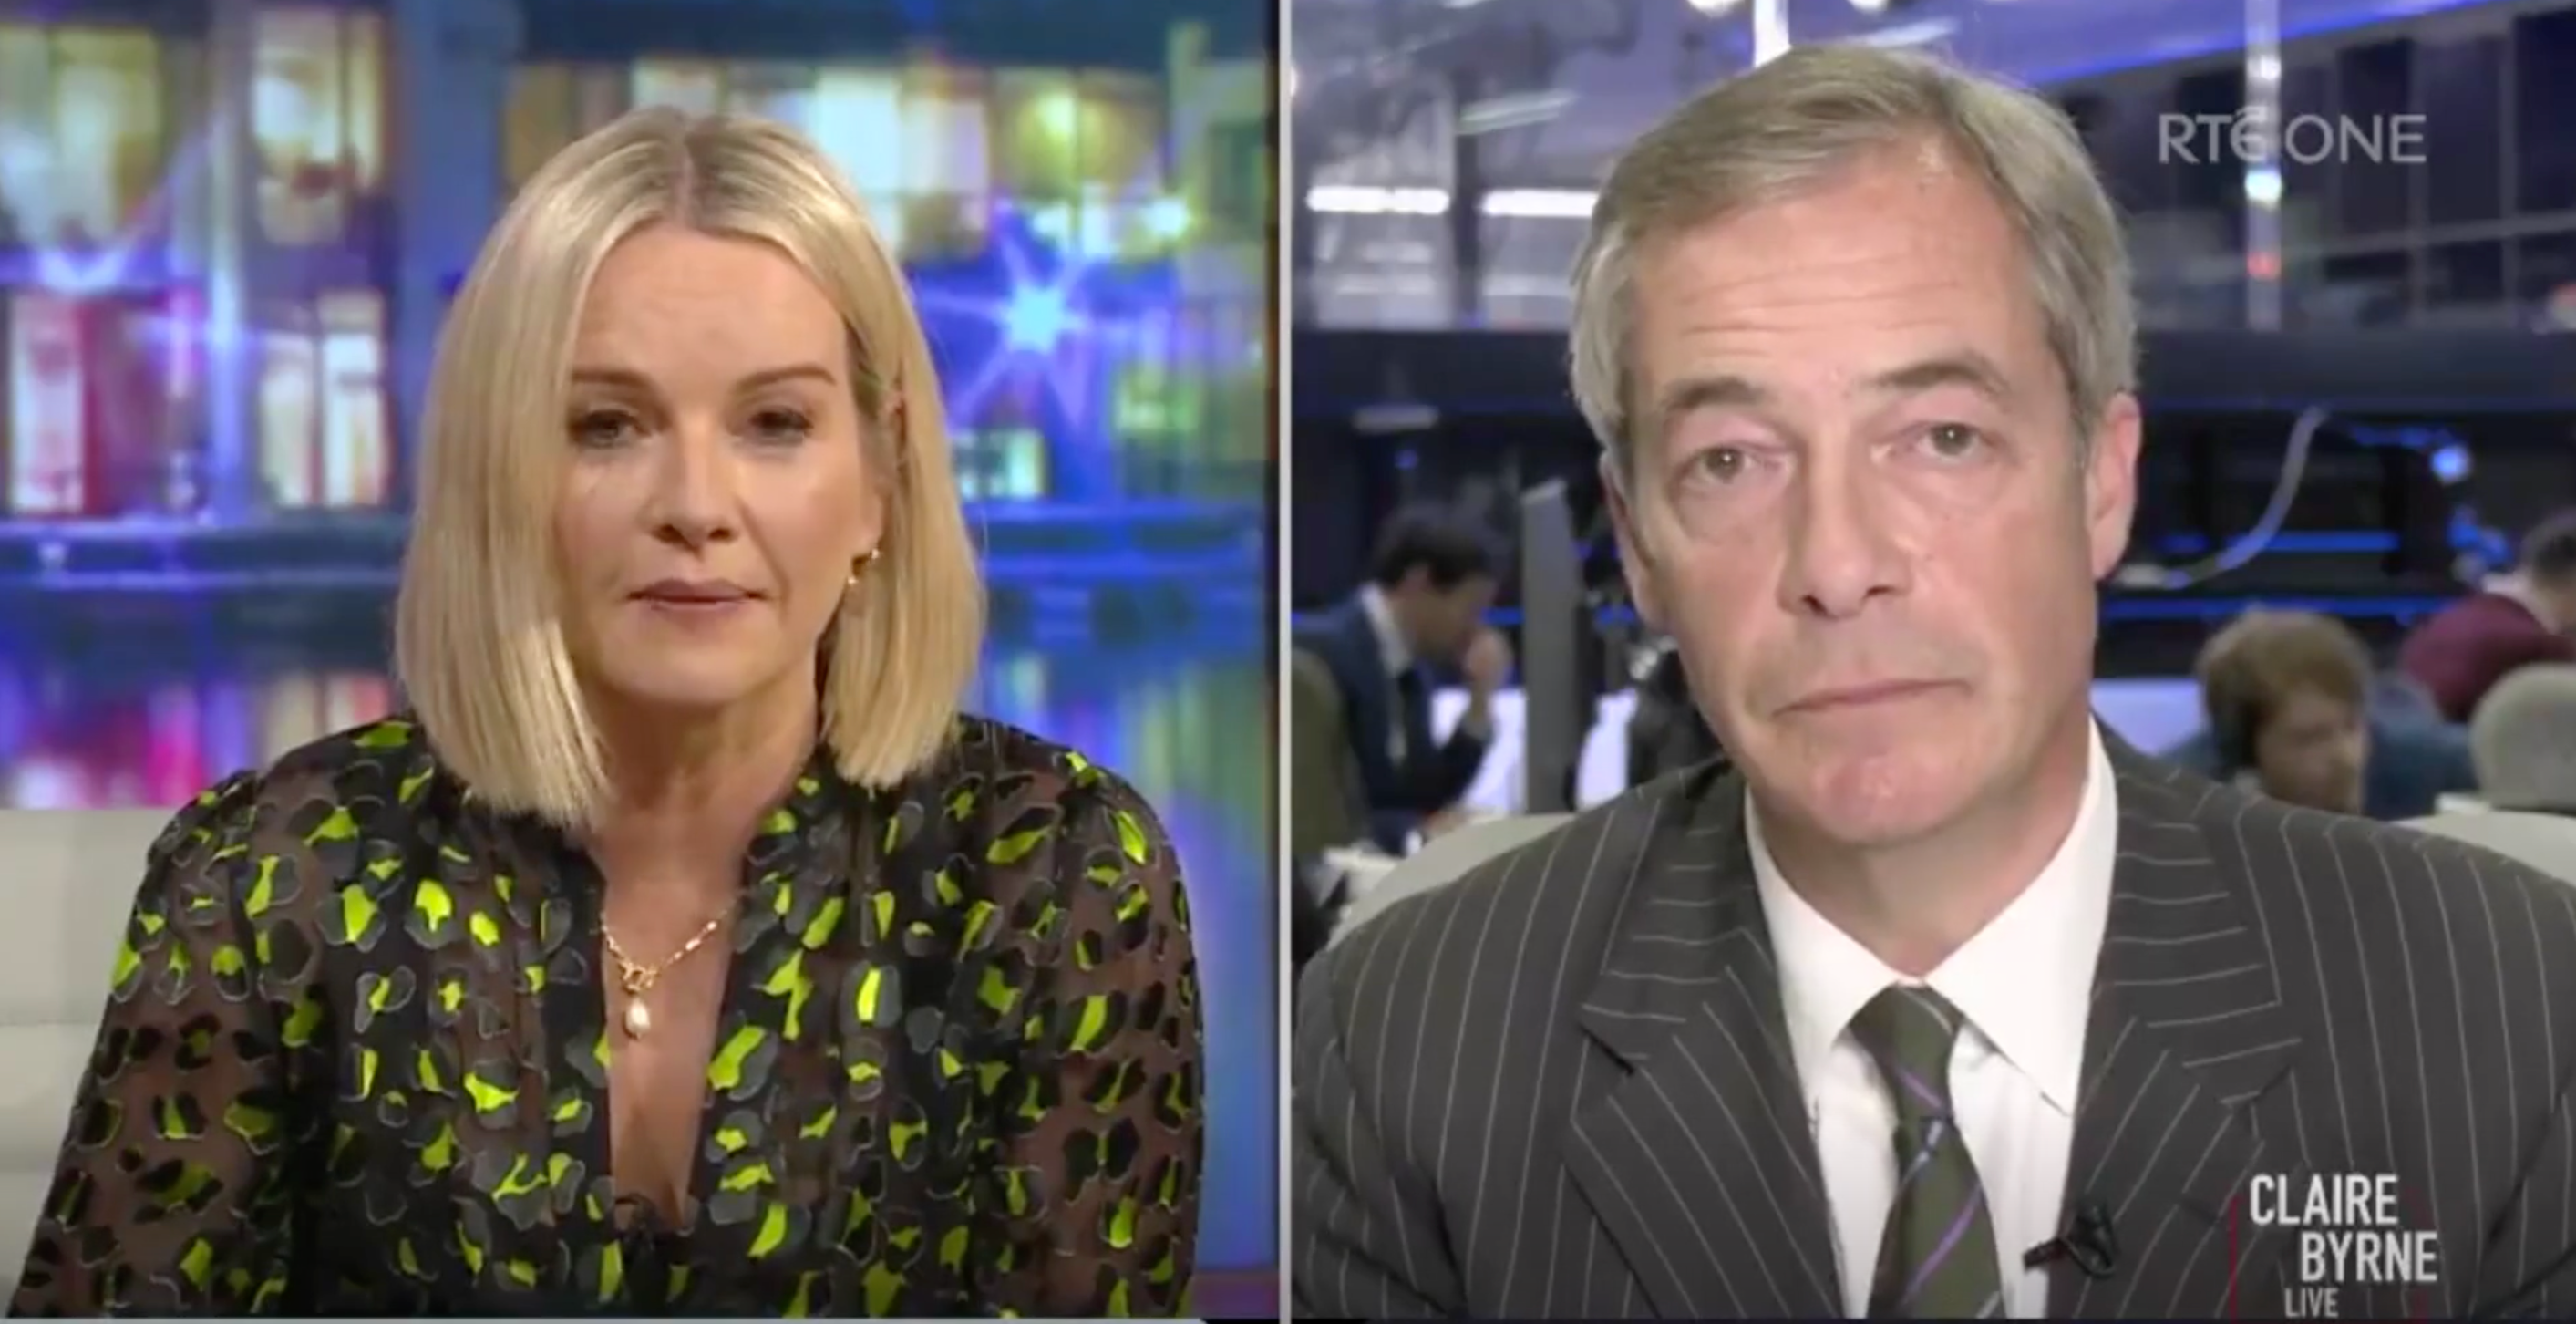 ‘You haven’t got a clue’: RTE’s Claire Byrne challenges Nigel Farage over his knowledge of Ireland